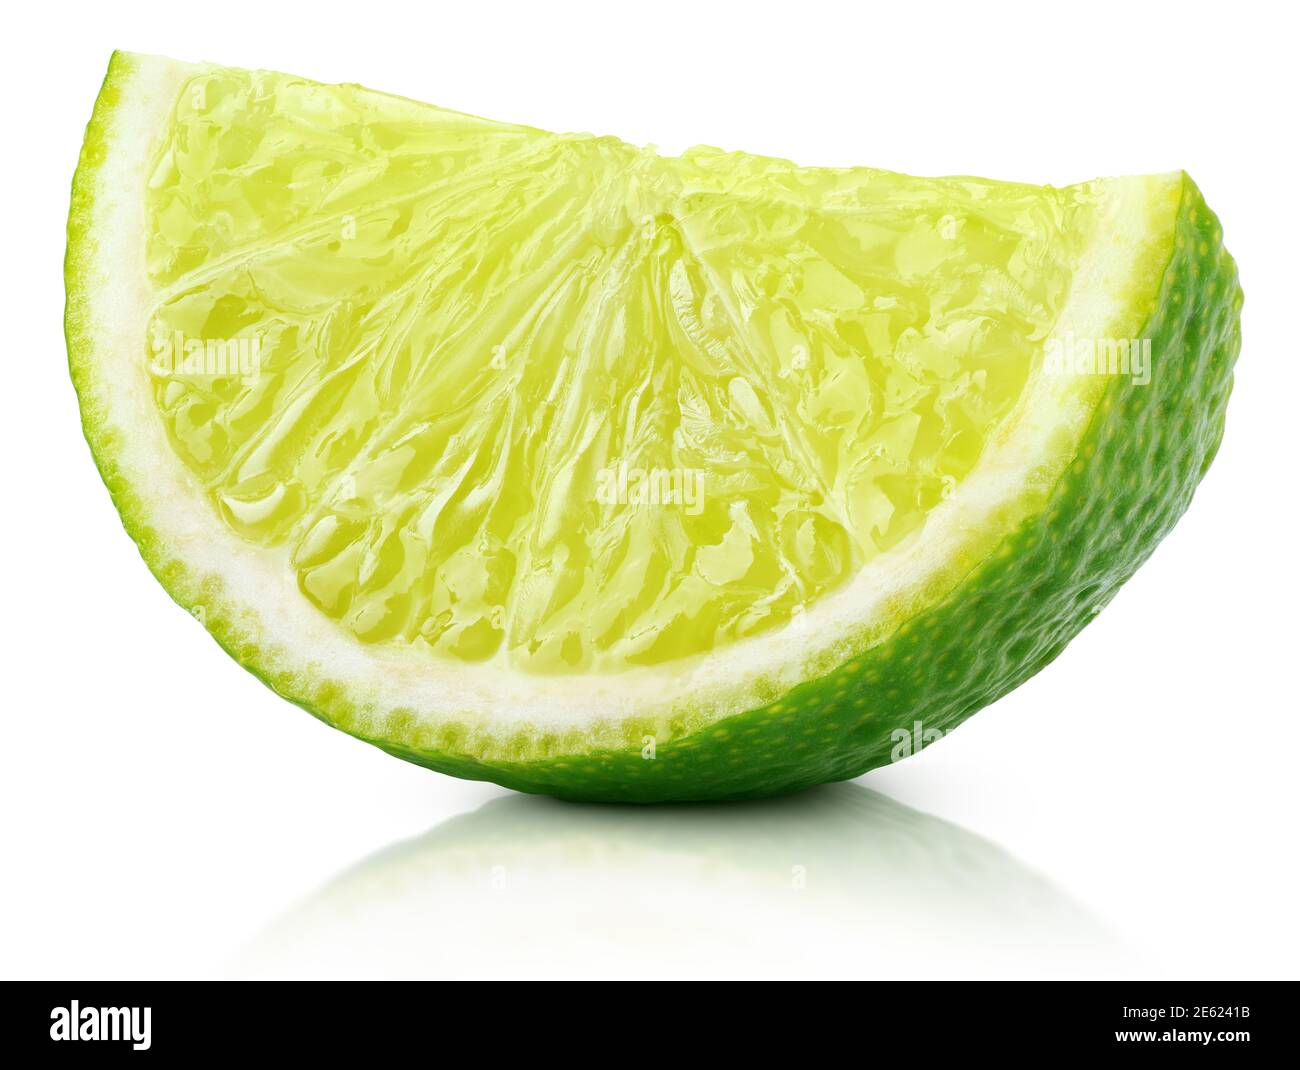 Single slice of lime citrus fruit isolated on white background with clipping path. Full depth of field. Stock Photo